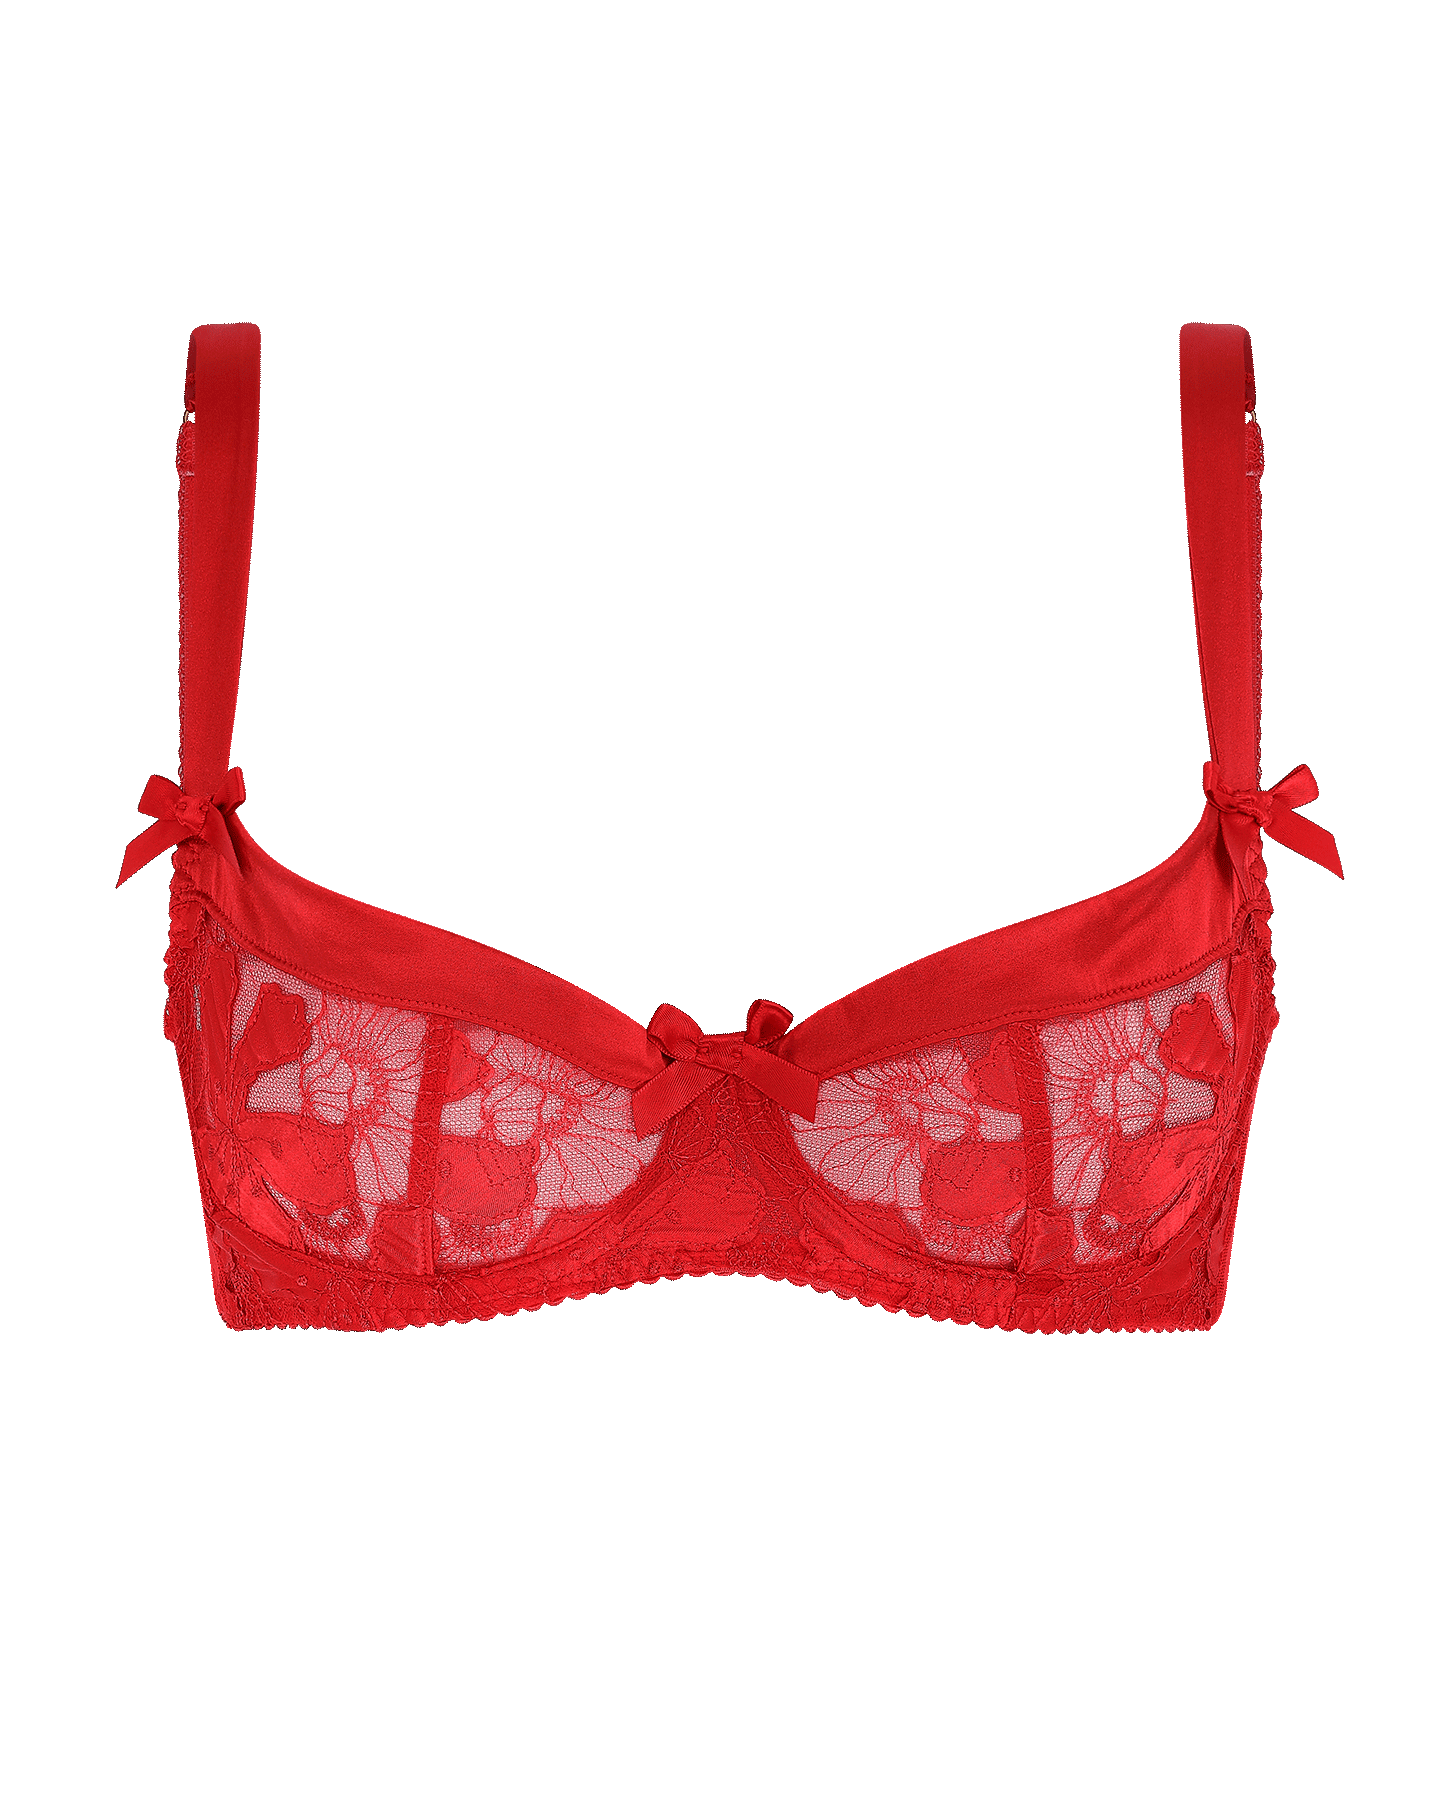 NWT Agent Provocateur Kendall Red Lace Halter Neck Bra 32B